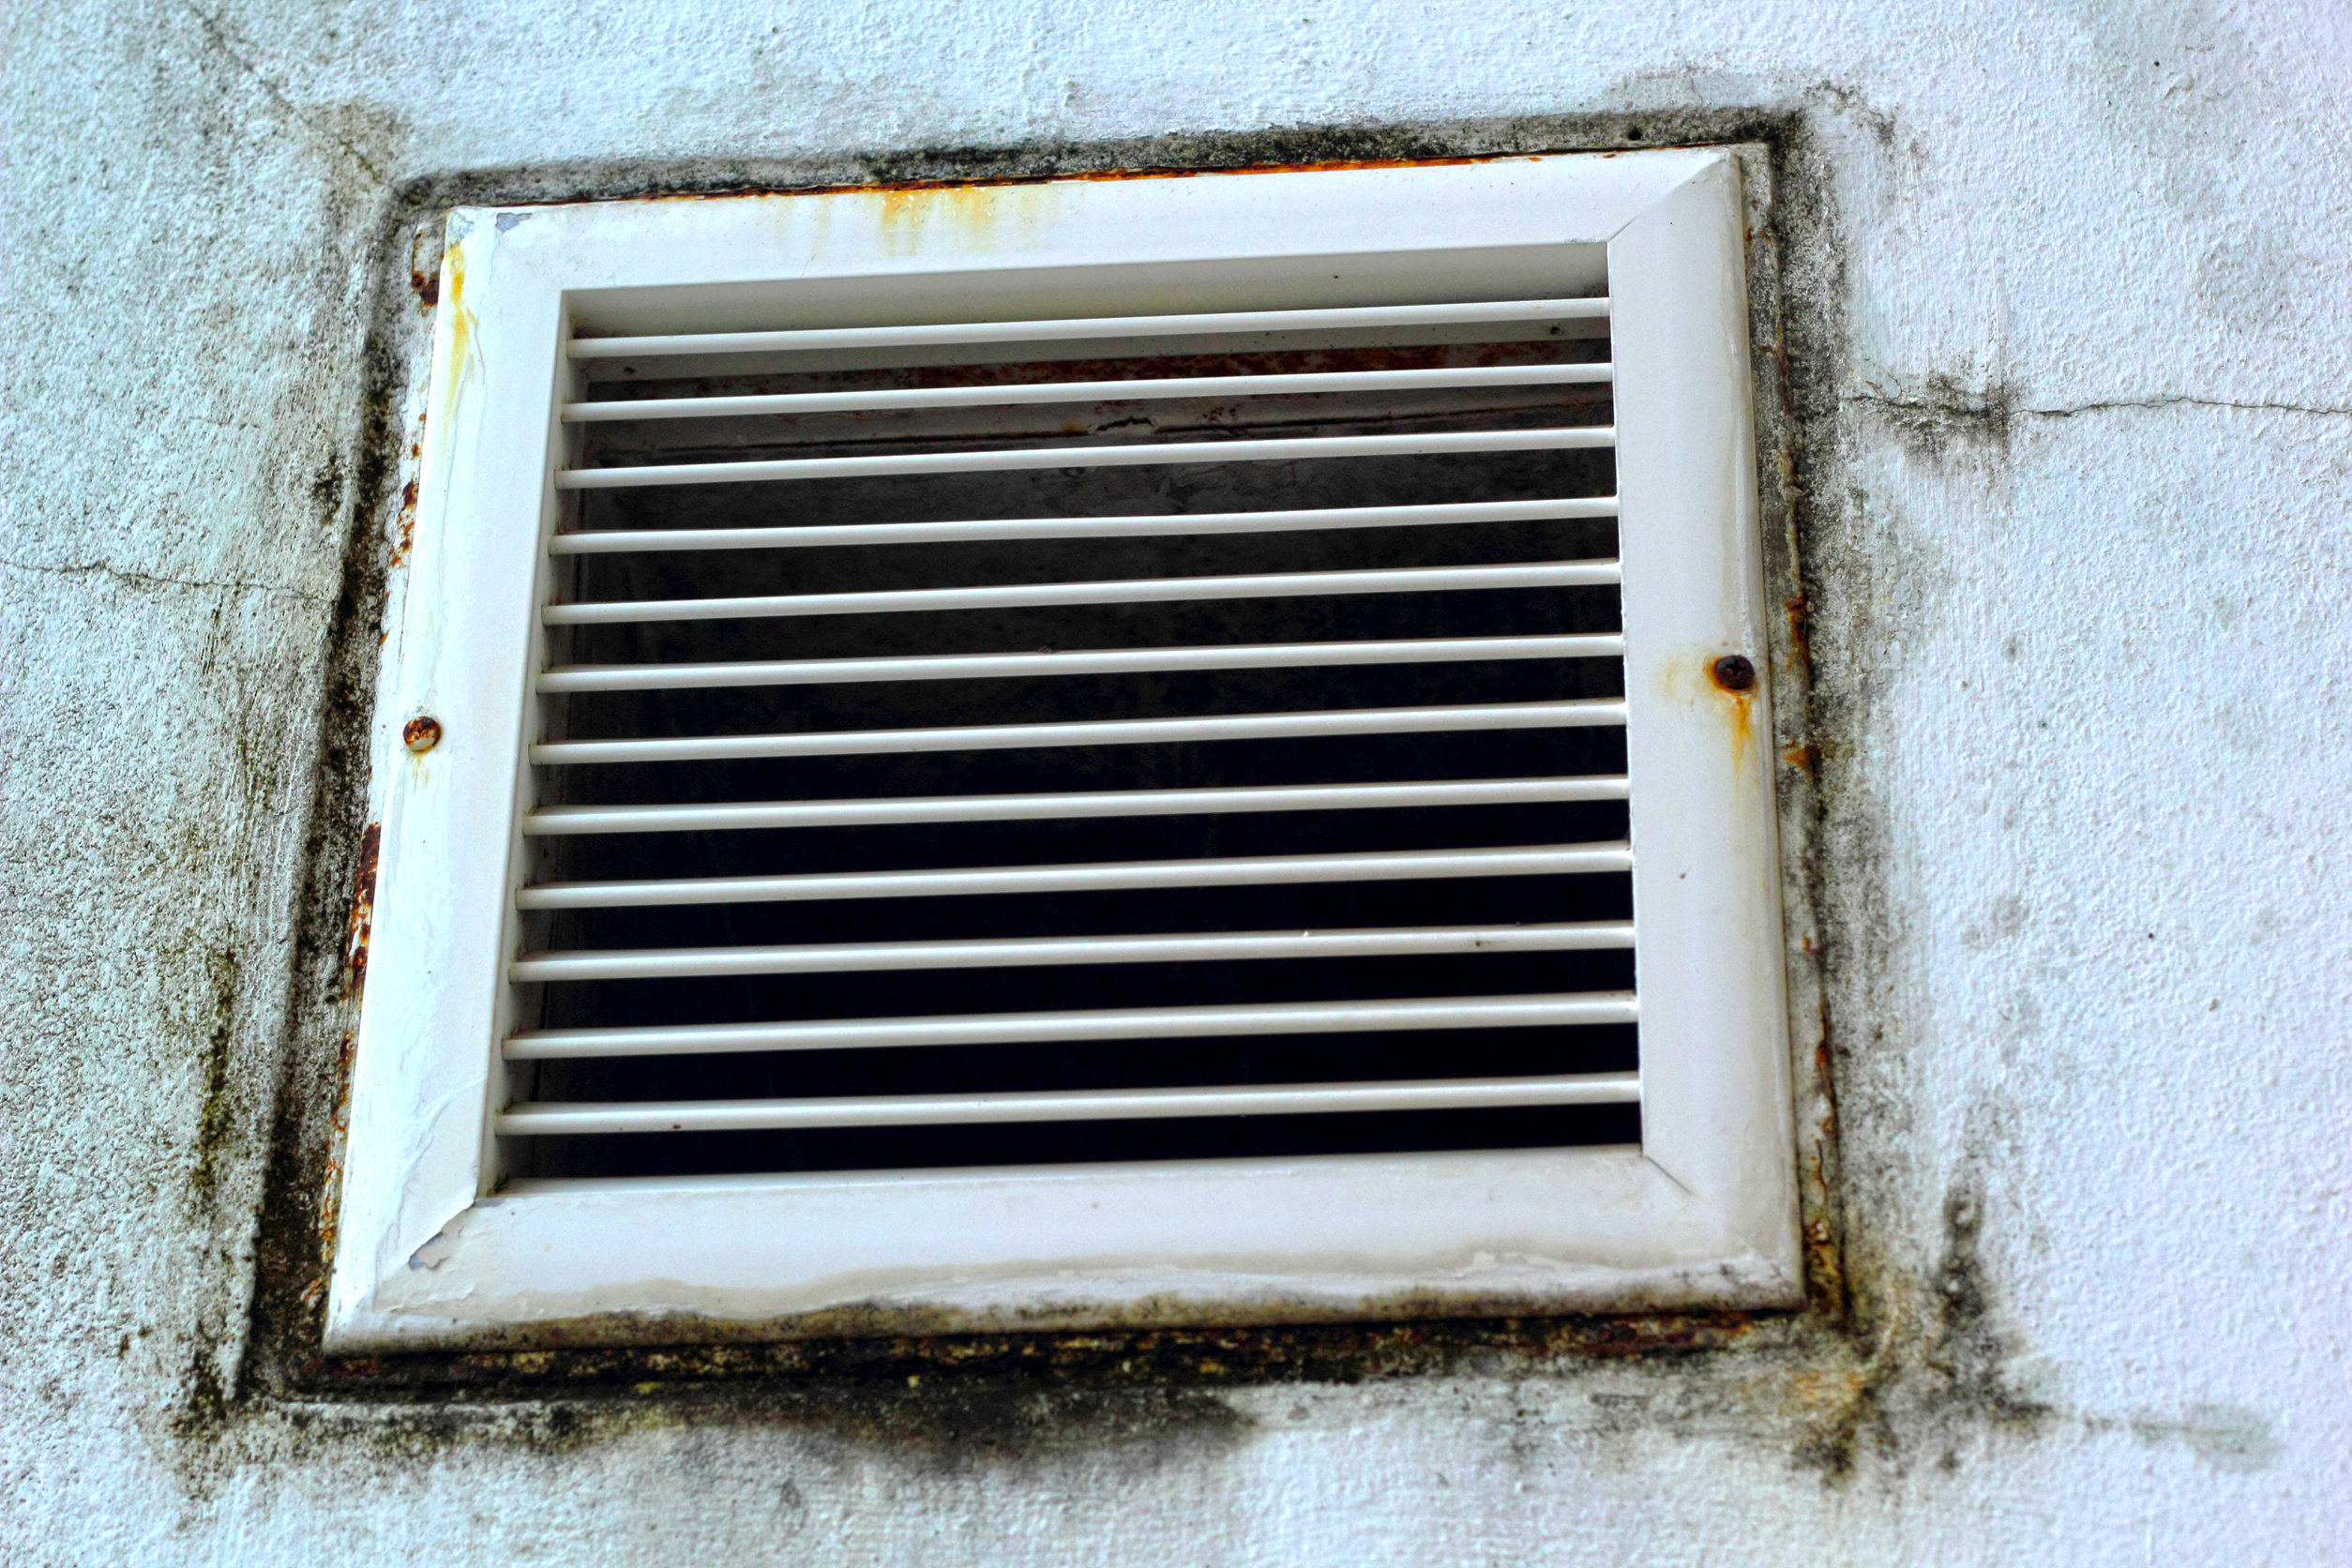 How to Determine When Air Ducts Need Cleaning